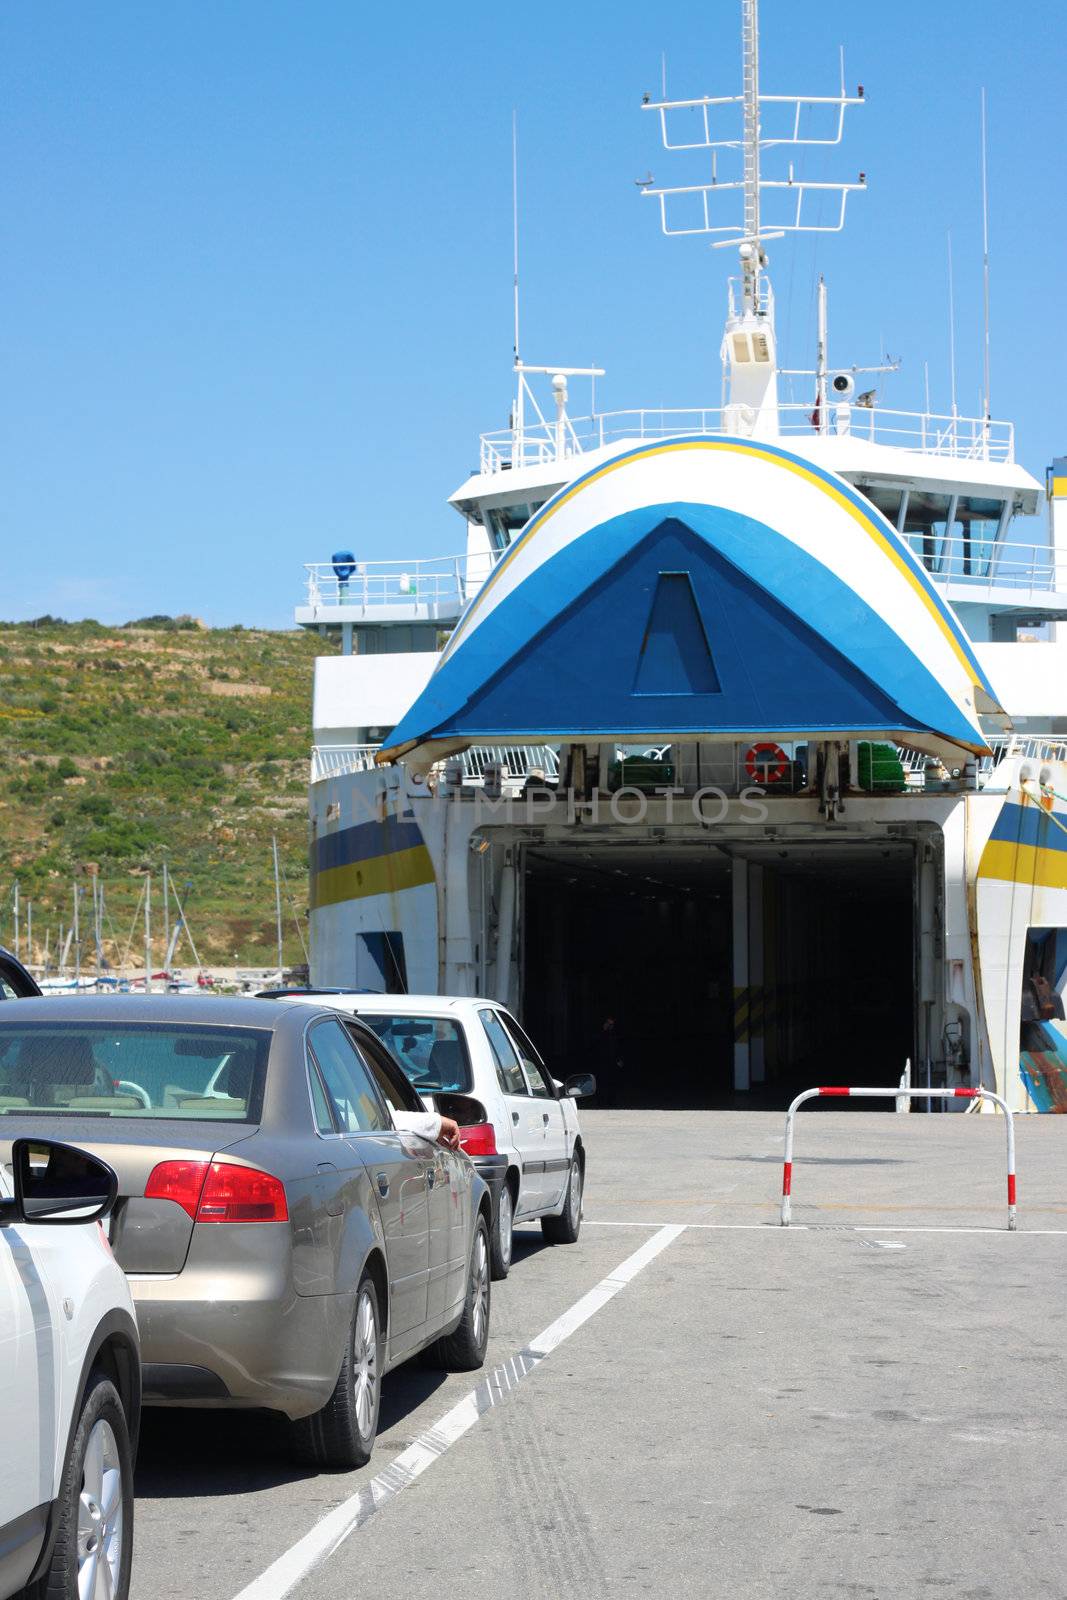 Cars waiting to board a ship between Malta and Gozo